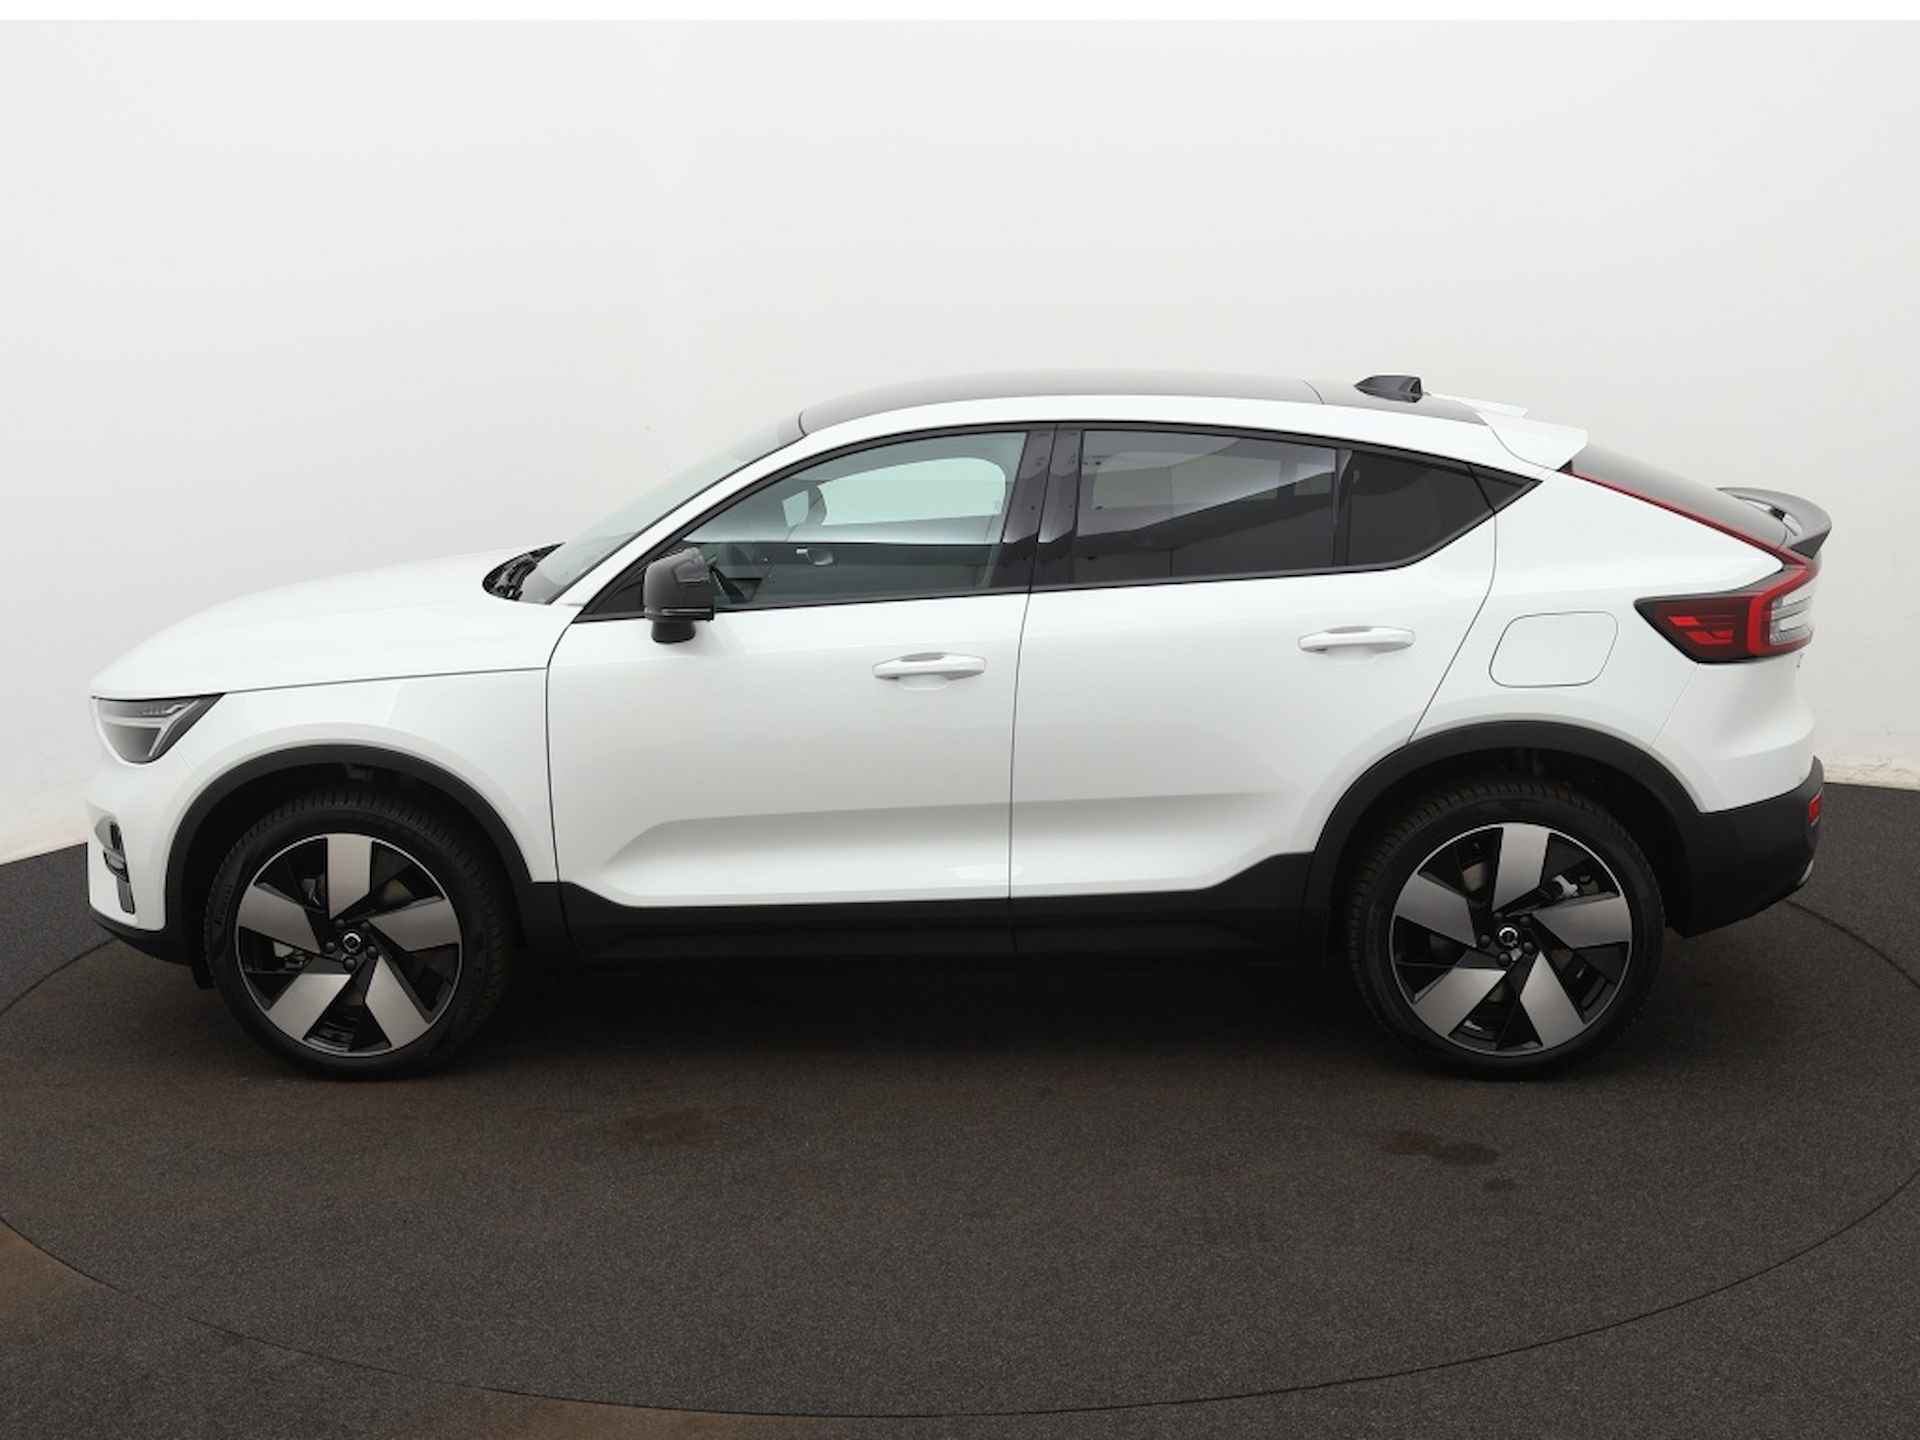 Volvo C40 Extended Plus 82 kWh - 2/47